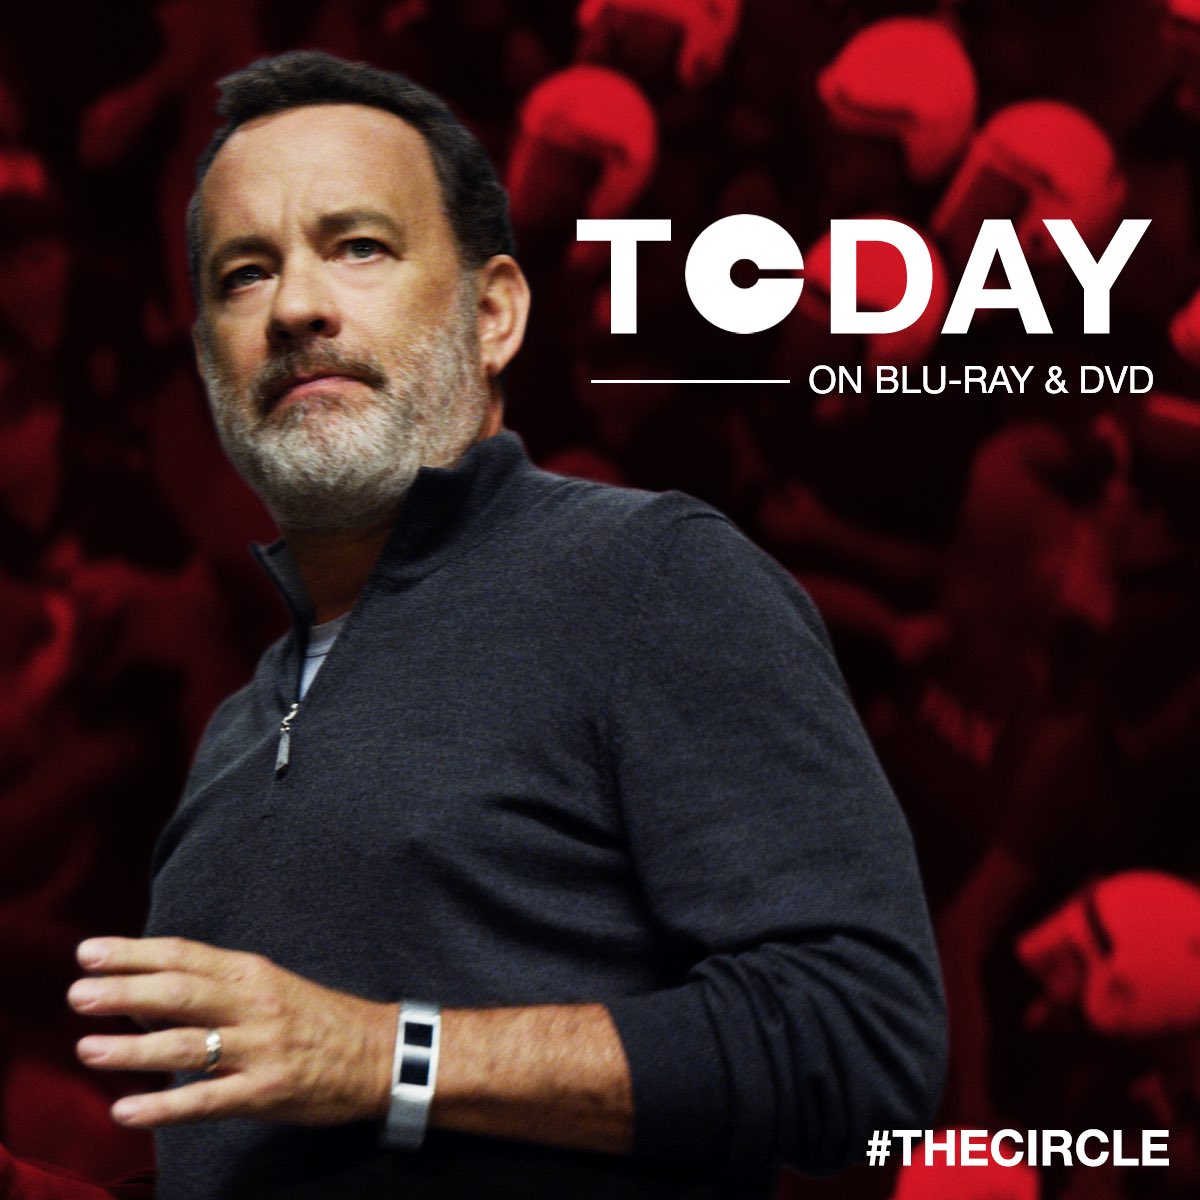 The search for truth can lead down a dangerous path. See Tom Hanks in #TheCircle - on Blu-ray & DVD TODAY. bit.ly/2uRK8a2